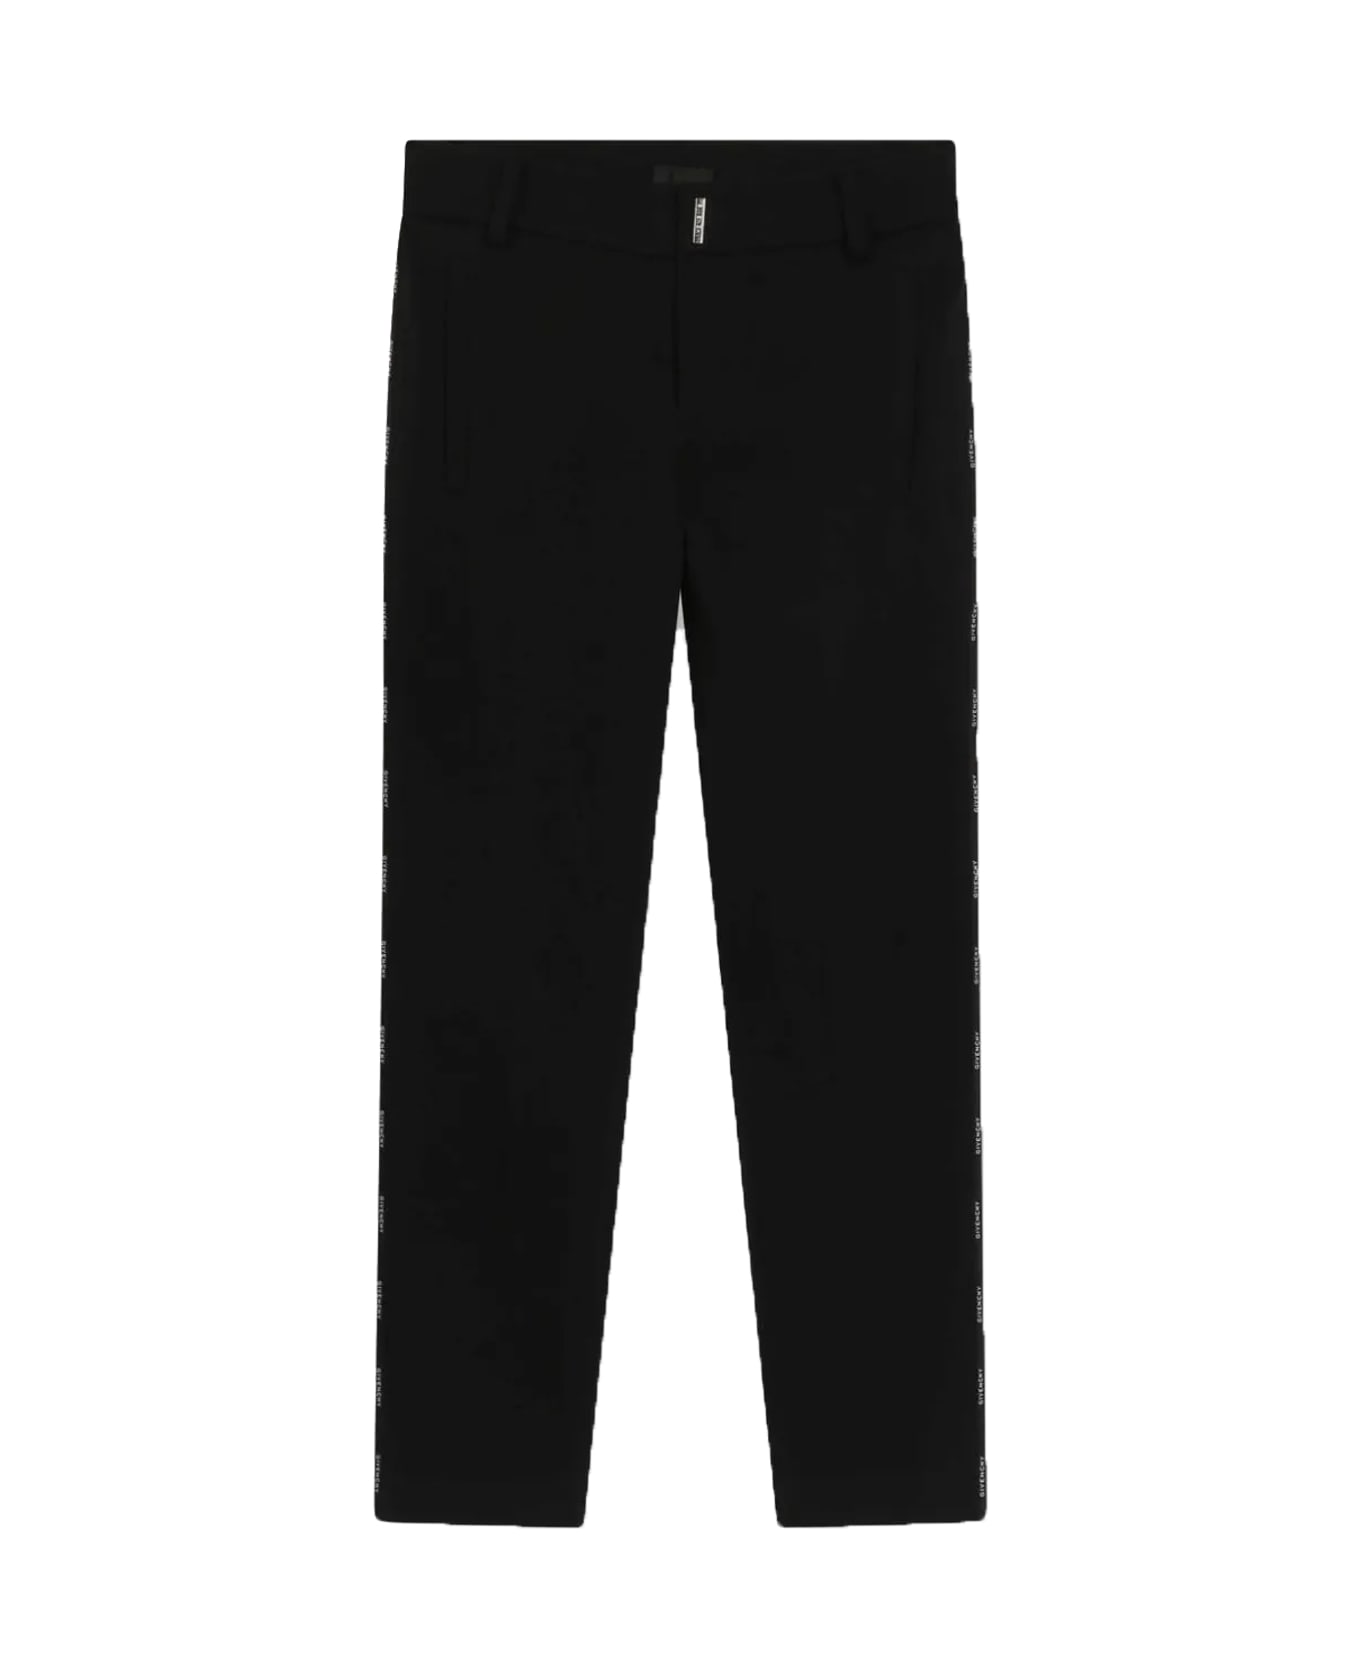 Givenchy Cotton Blend Pants - Back ボトムス